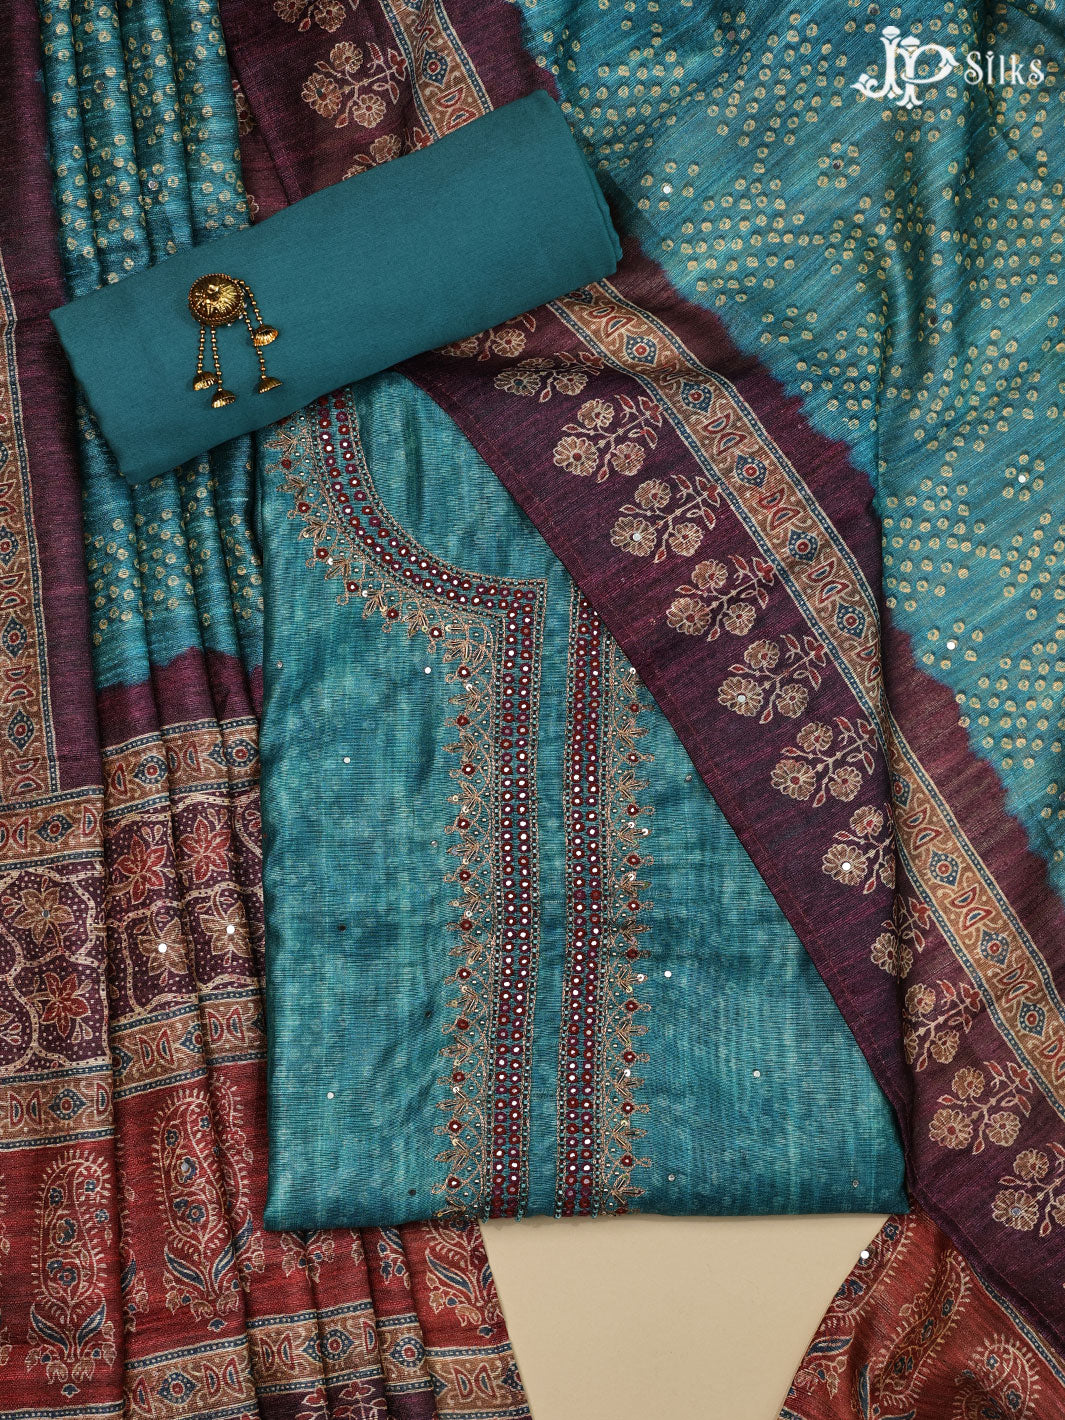 Teal and Blue Tussar Unstiched Chudidhar Material - E1448 - View 1